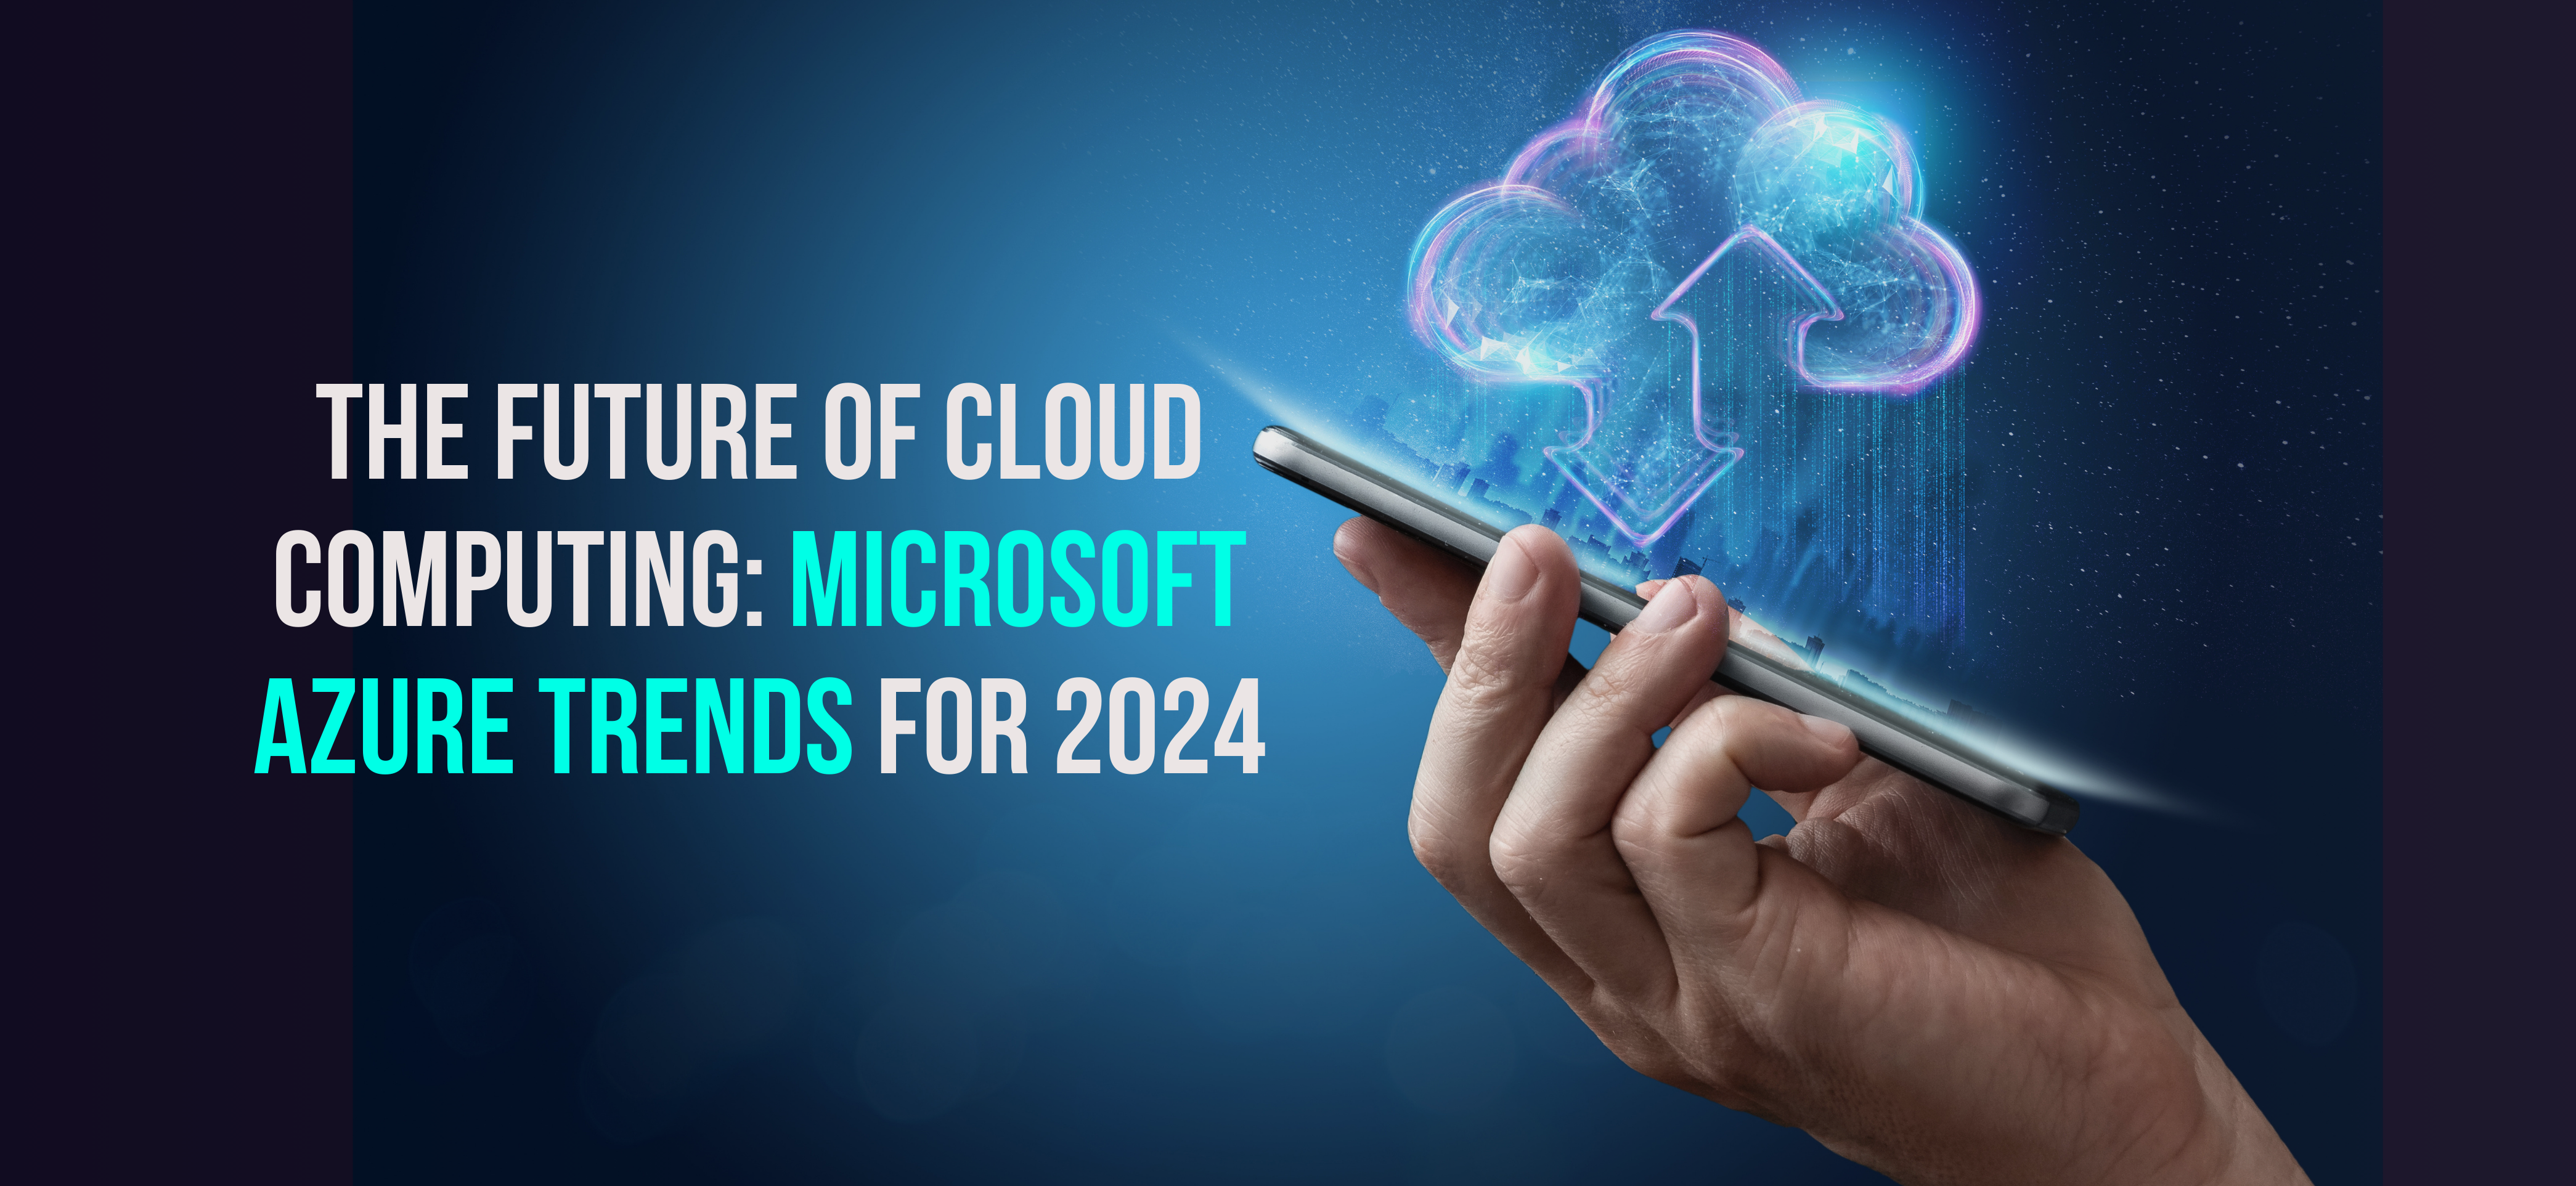 The Future of Cloud Computing: Microsoft Azure Trends for 2024 - Internet Soft